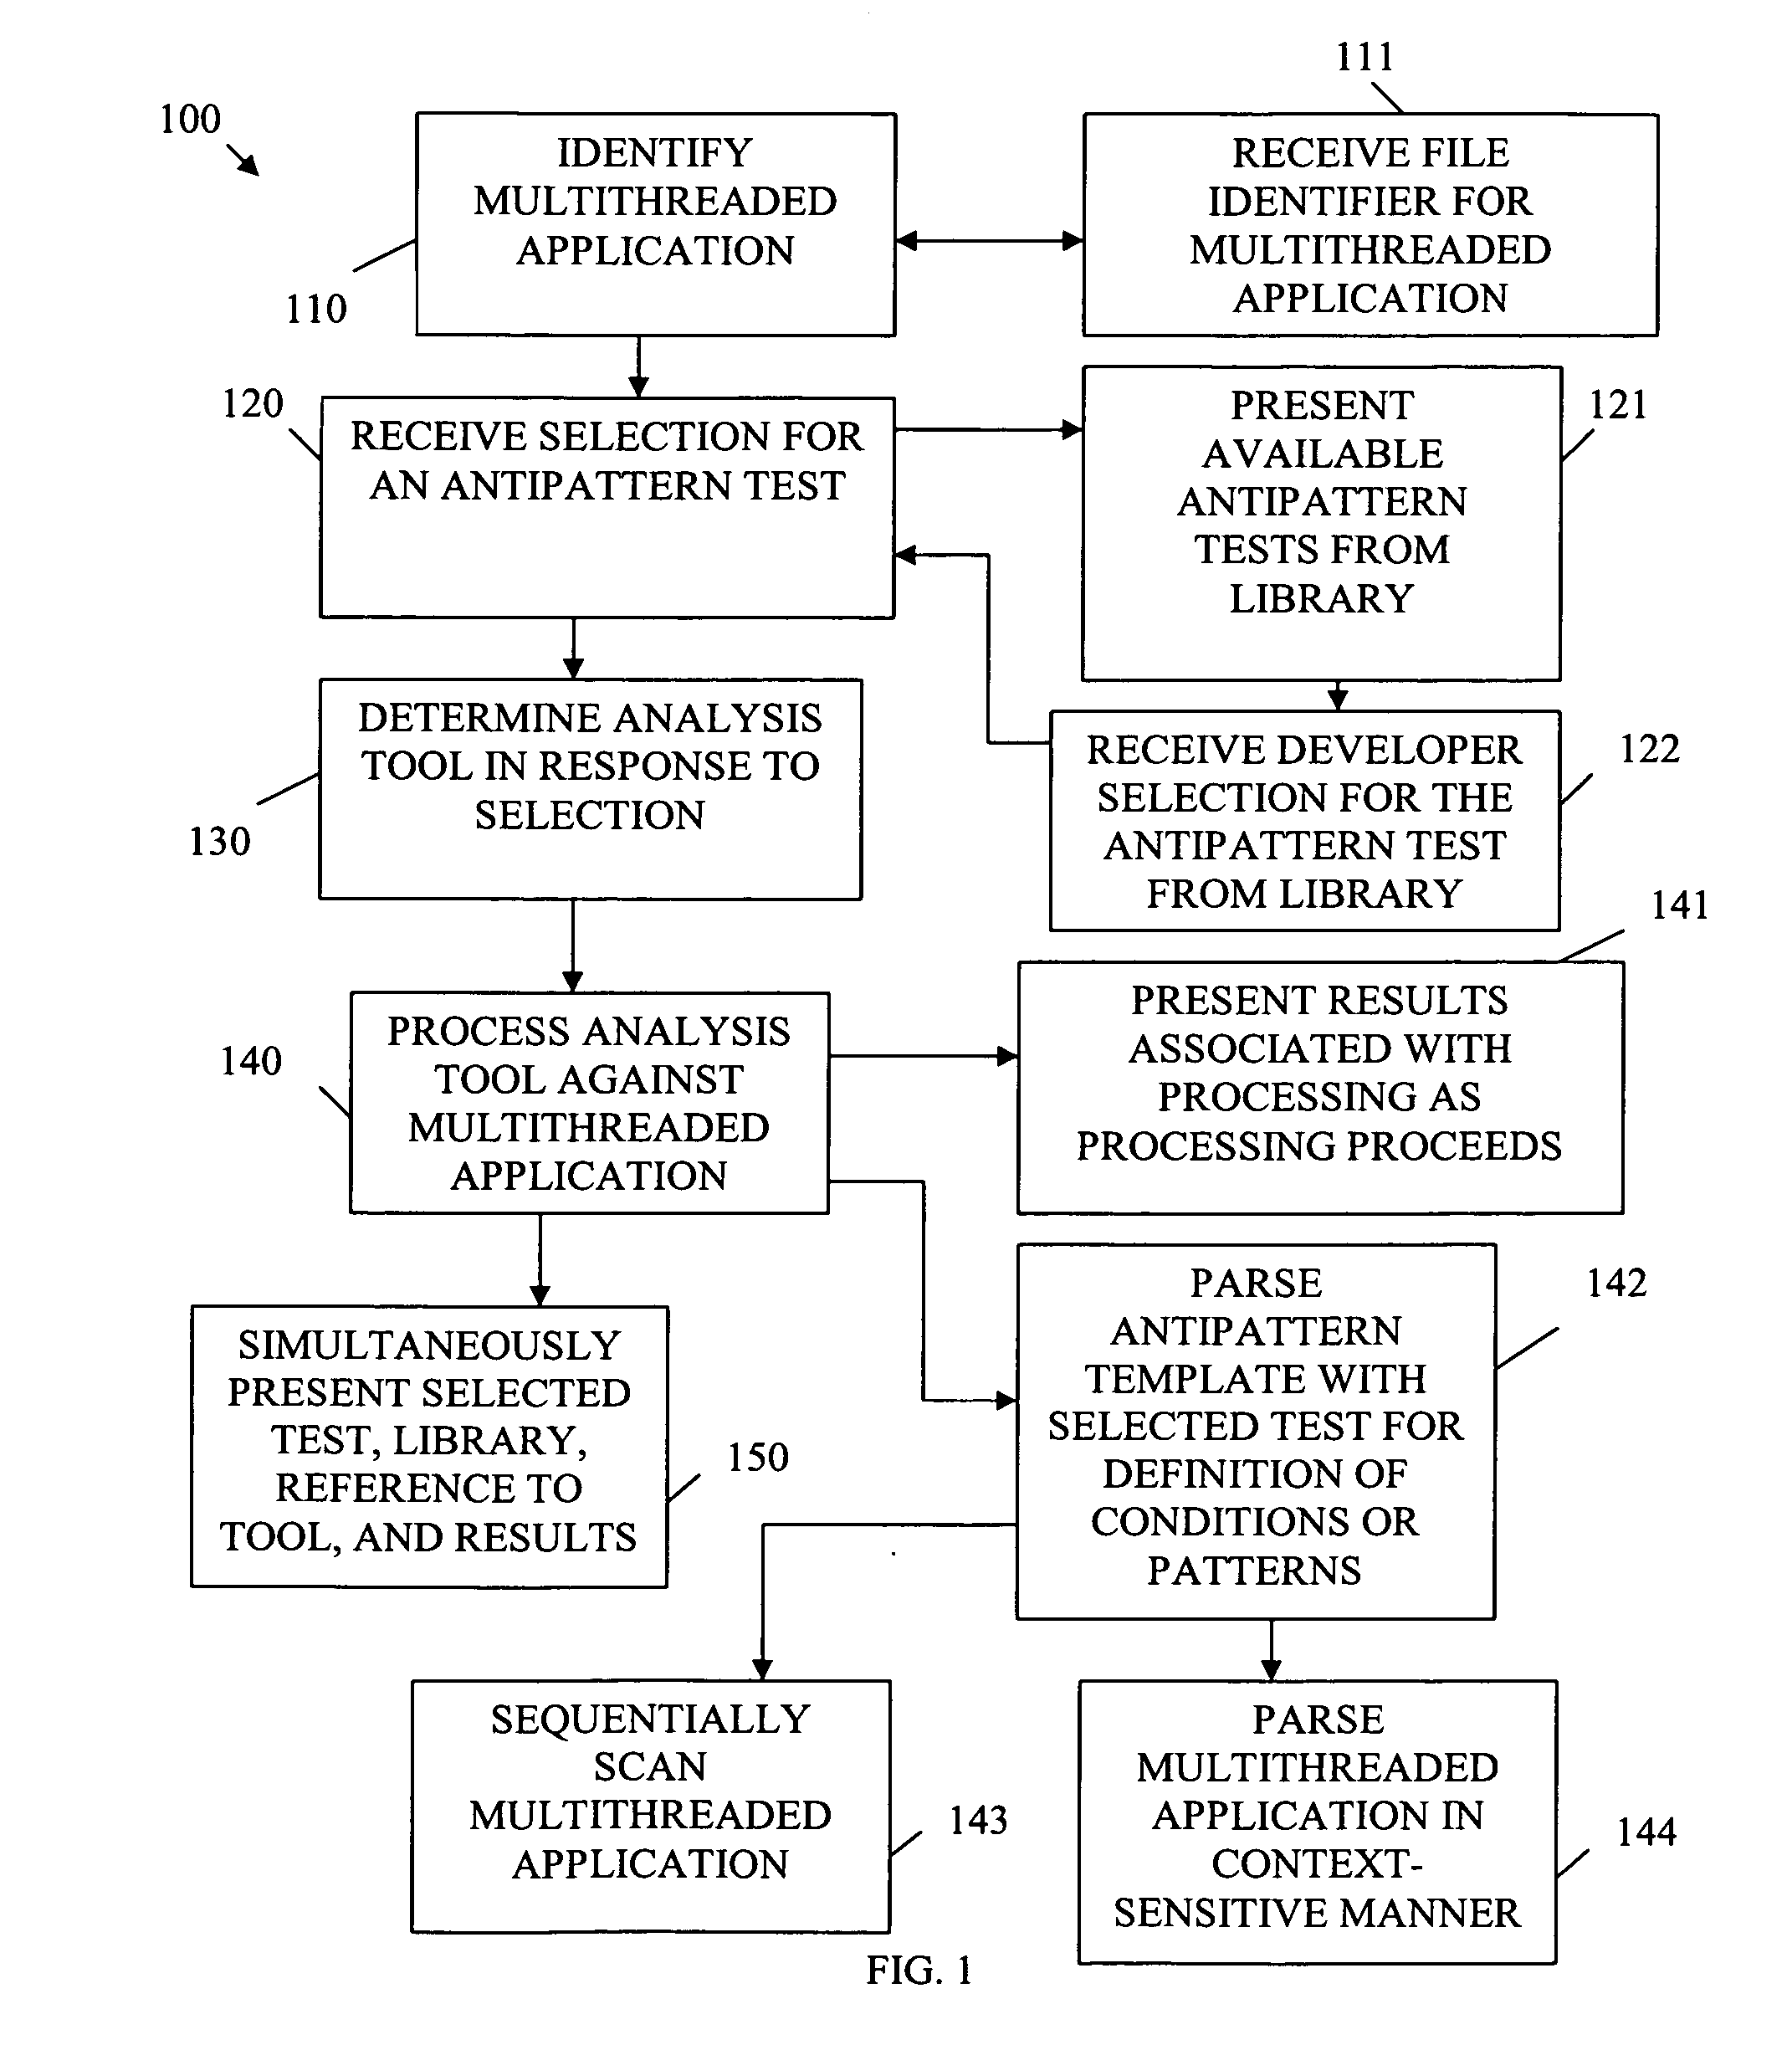 Antipattern detection processing for a multithreaded application